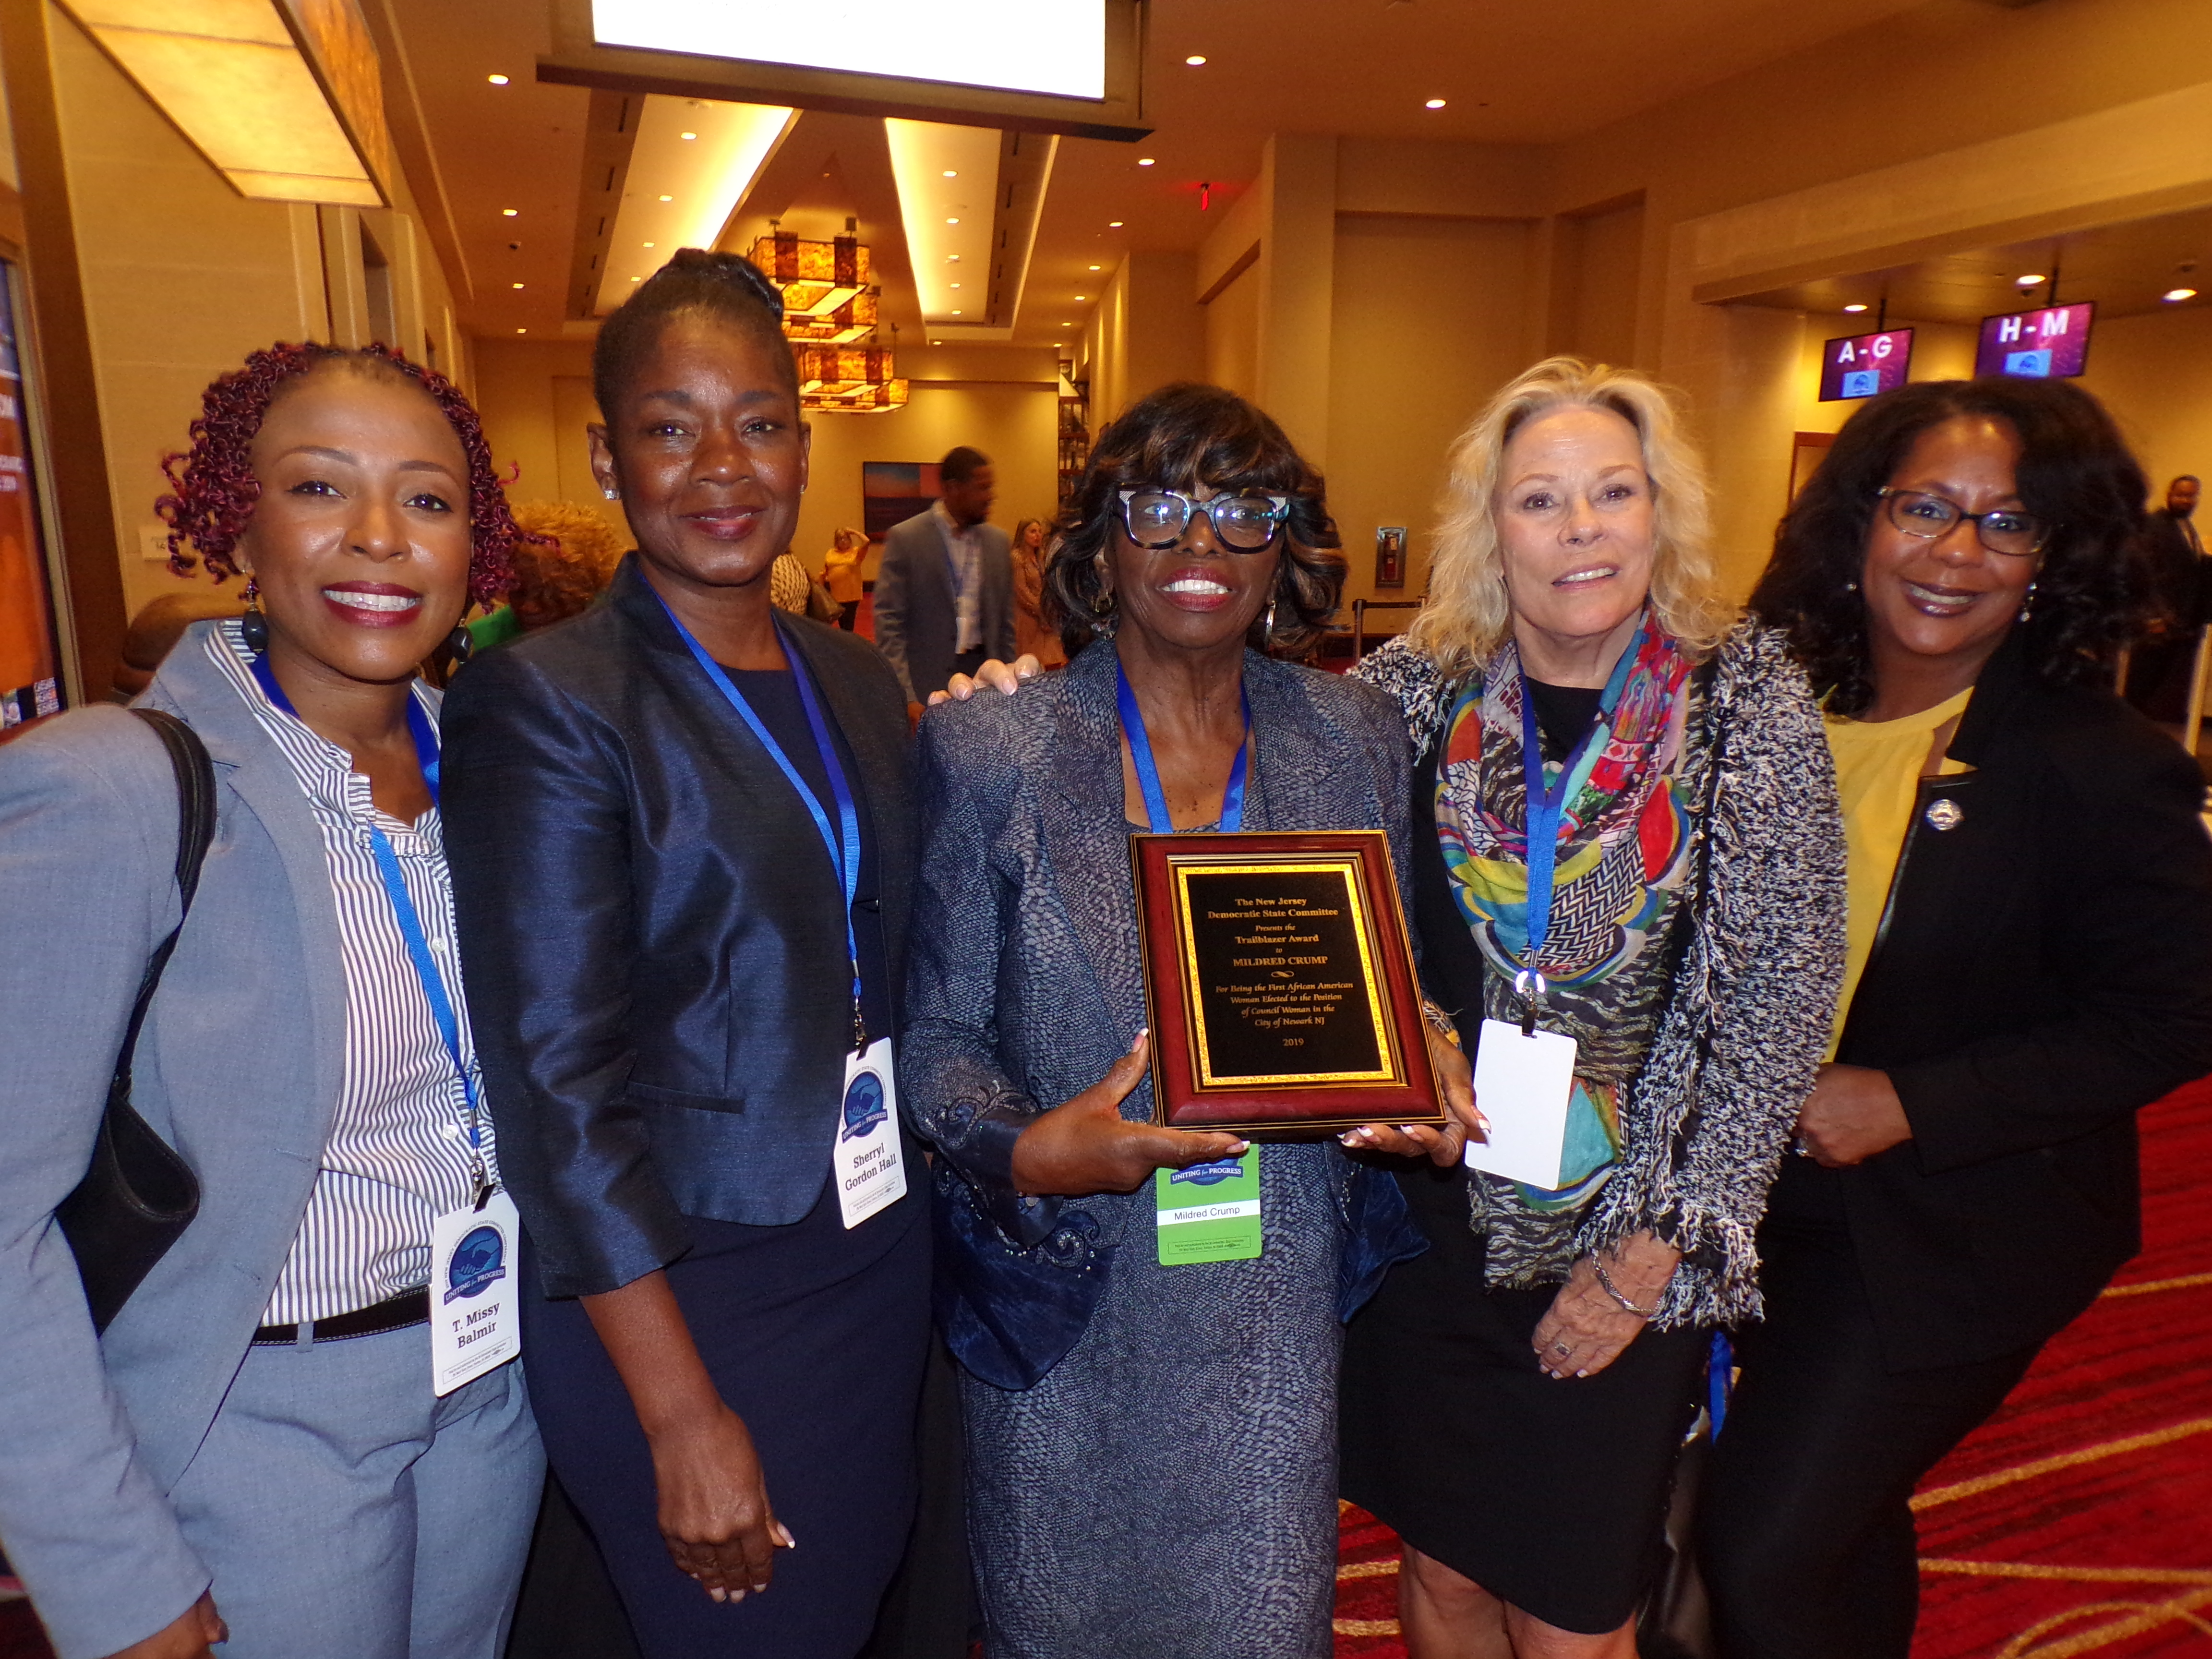 Honored by the Democratic State Committee with a trailblazer award, Newark Council President Mildred Crump (center) celebrated with, from left: T. Missy Balmir, Sherryl Gordon Hall, Truscha Quatrone, and Assemblywoman Verlina Reynolds-Jackson (D-15).